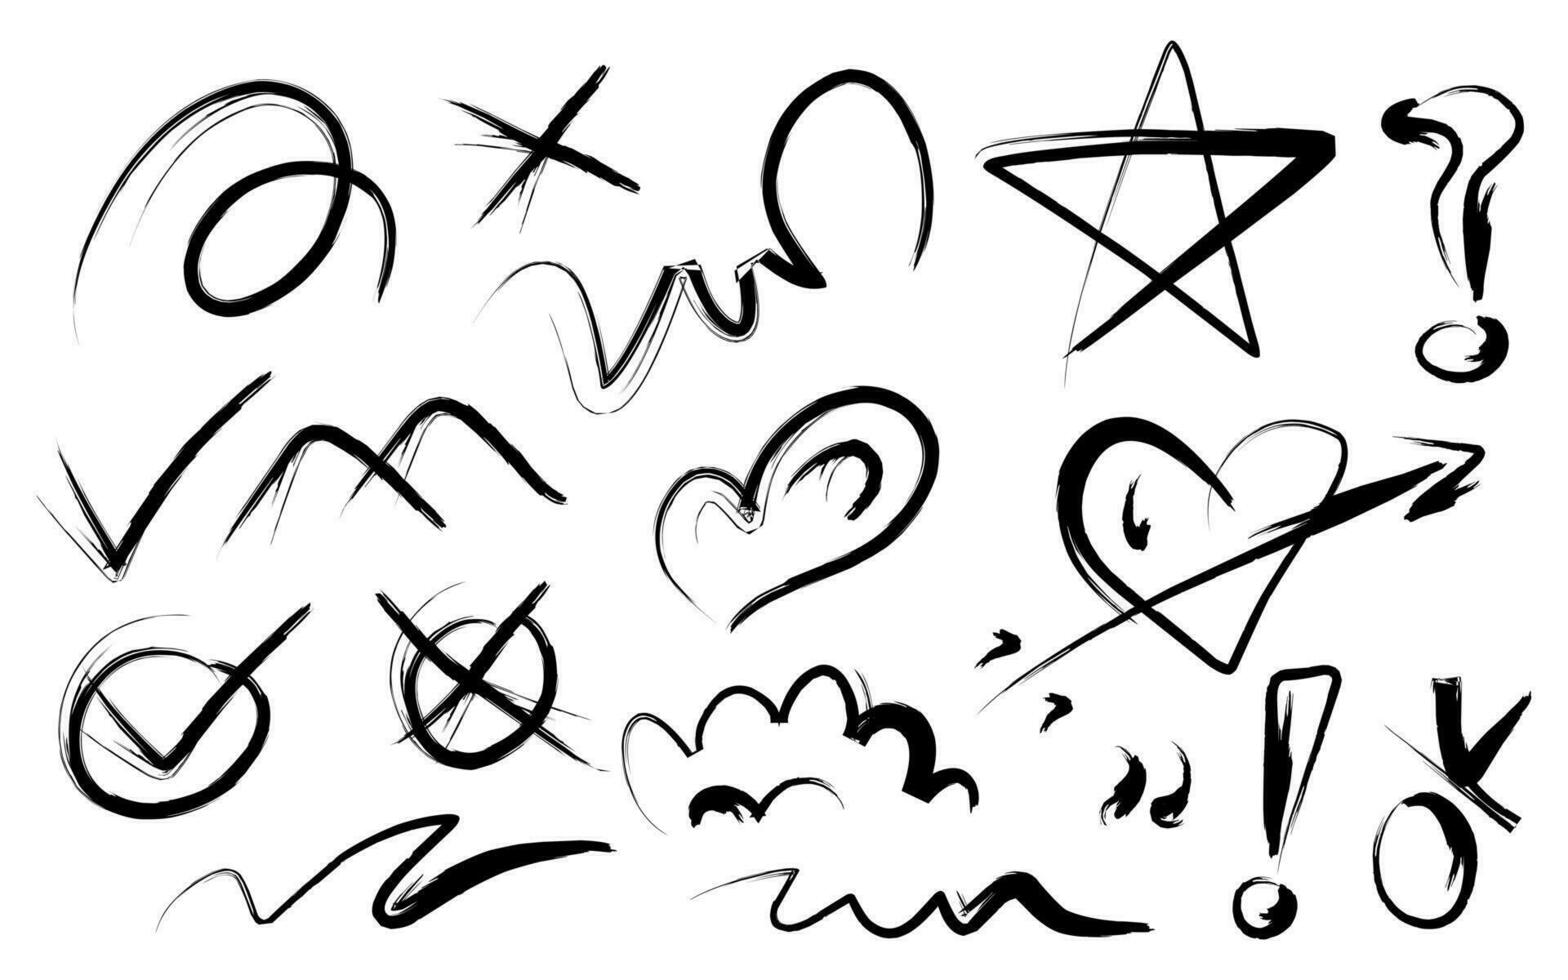 Set of trendy doodle and random childish doodle elements isolated on white background. Brush drawn, stroke, underline, star, heart shape, question mark, exclamation mark, true mark, and curly lines. vector